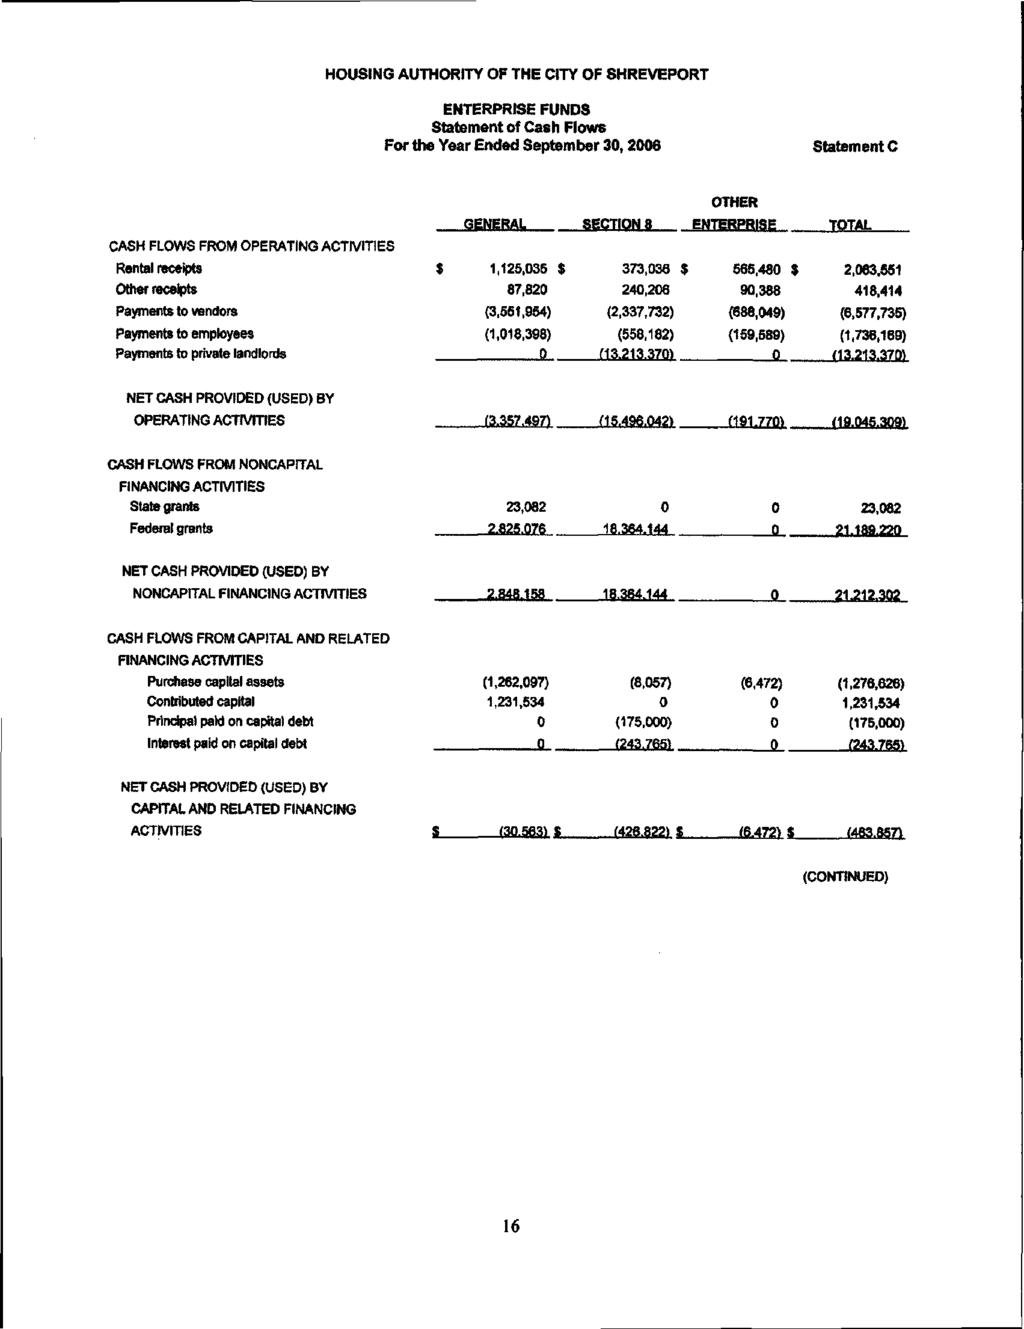 HOUSING AUTHORITY OF THE CITY OF SHREVEPORT ENTERPRISE FUNDS Statement of Cash Flows For the Year Ended September 3,26 Statement C OTHER GENERAL SECTIONS ENTERPRI TOTAL CASH FLOWS FROM OPERATING